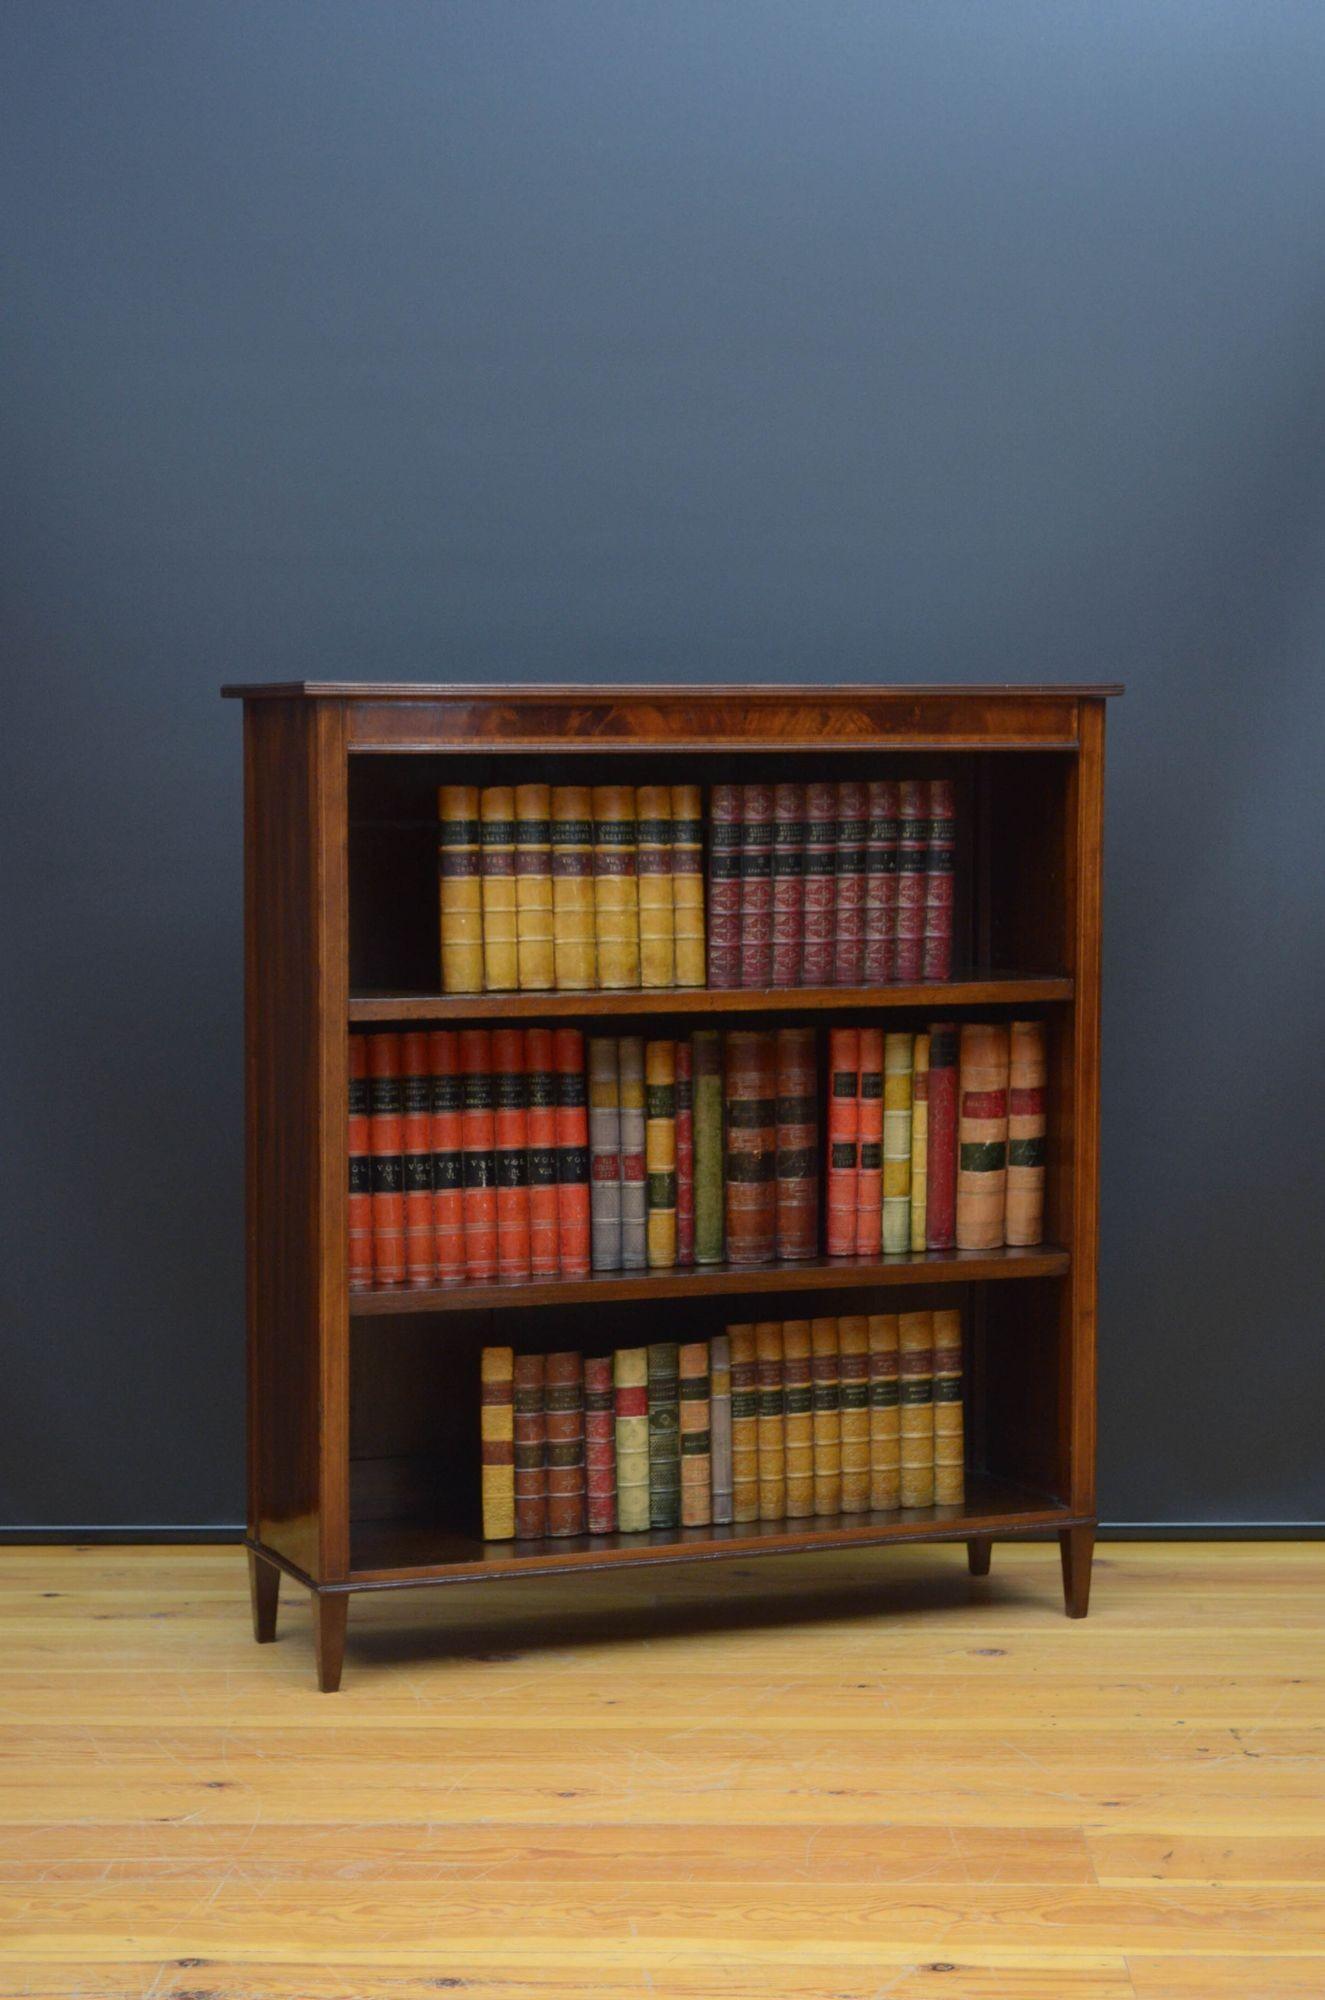 St017 Edwardian mahogany open bookcase, having figured mahogany top with satinwood crossbanded edge above flamed mahogany frieze and two height adjustable shelves, all flanked by inlaid pilasters terminating in tapered legs. This antique bookcase is